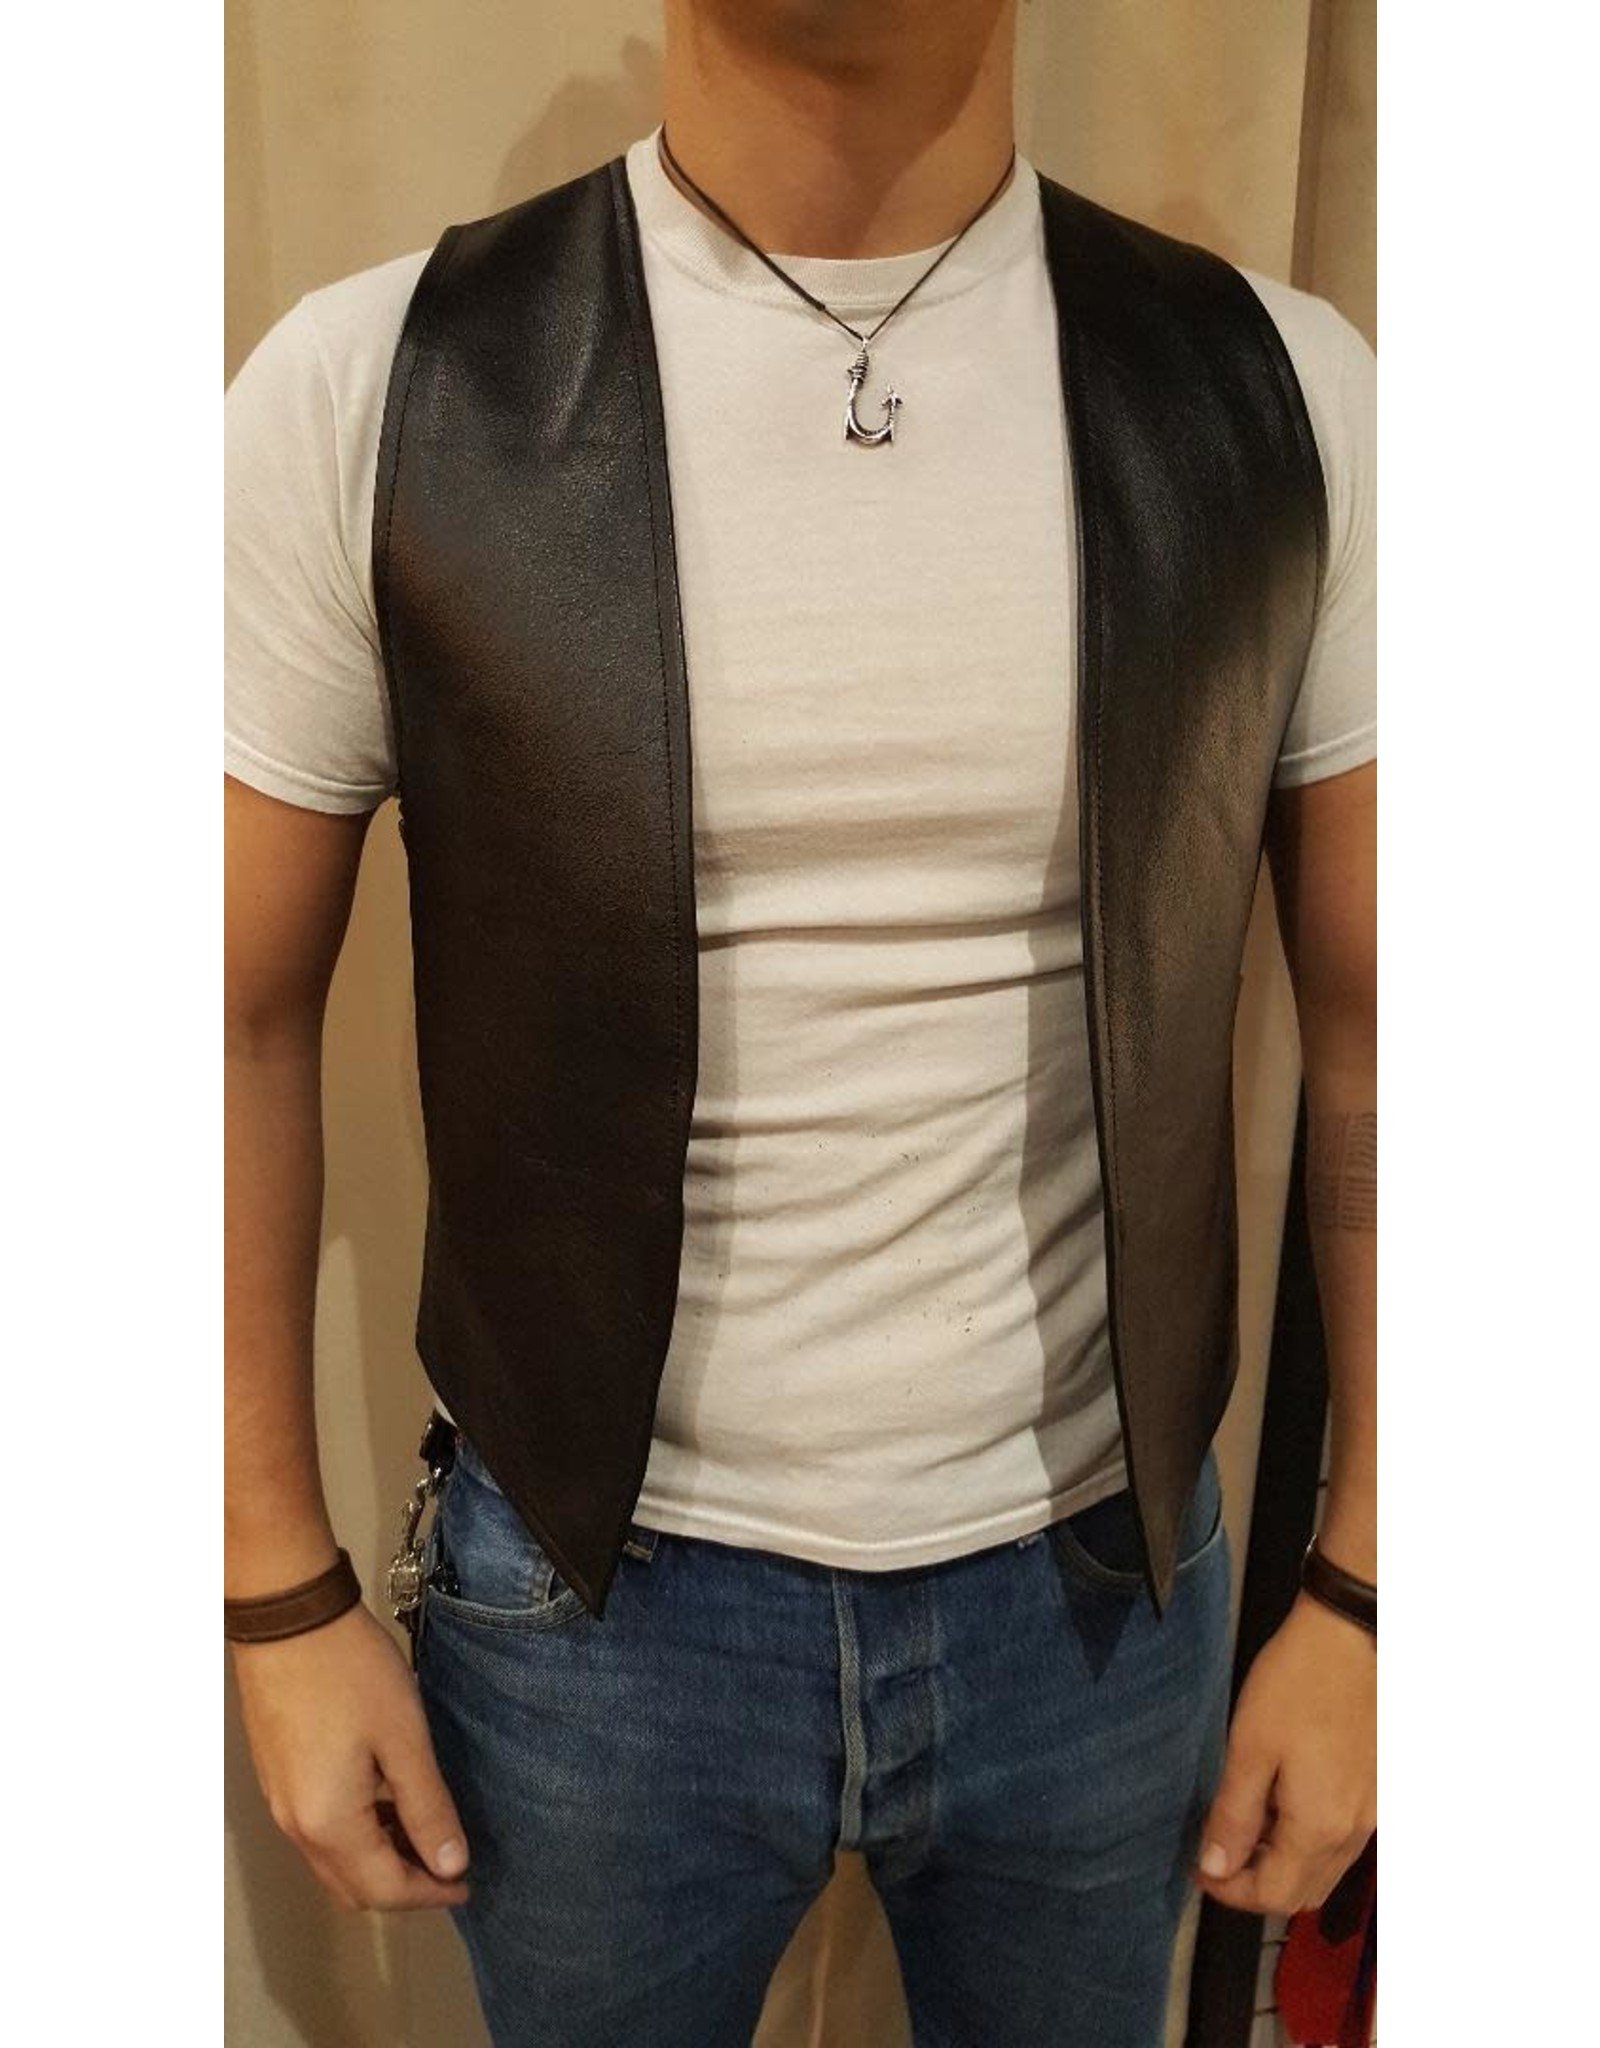 Doghouse Leathers Crafting DH Leathers Bar Vest with Lace Sides